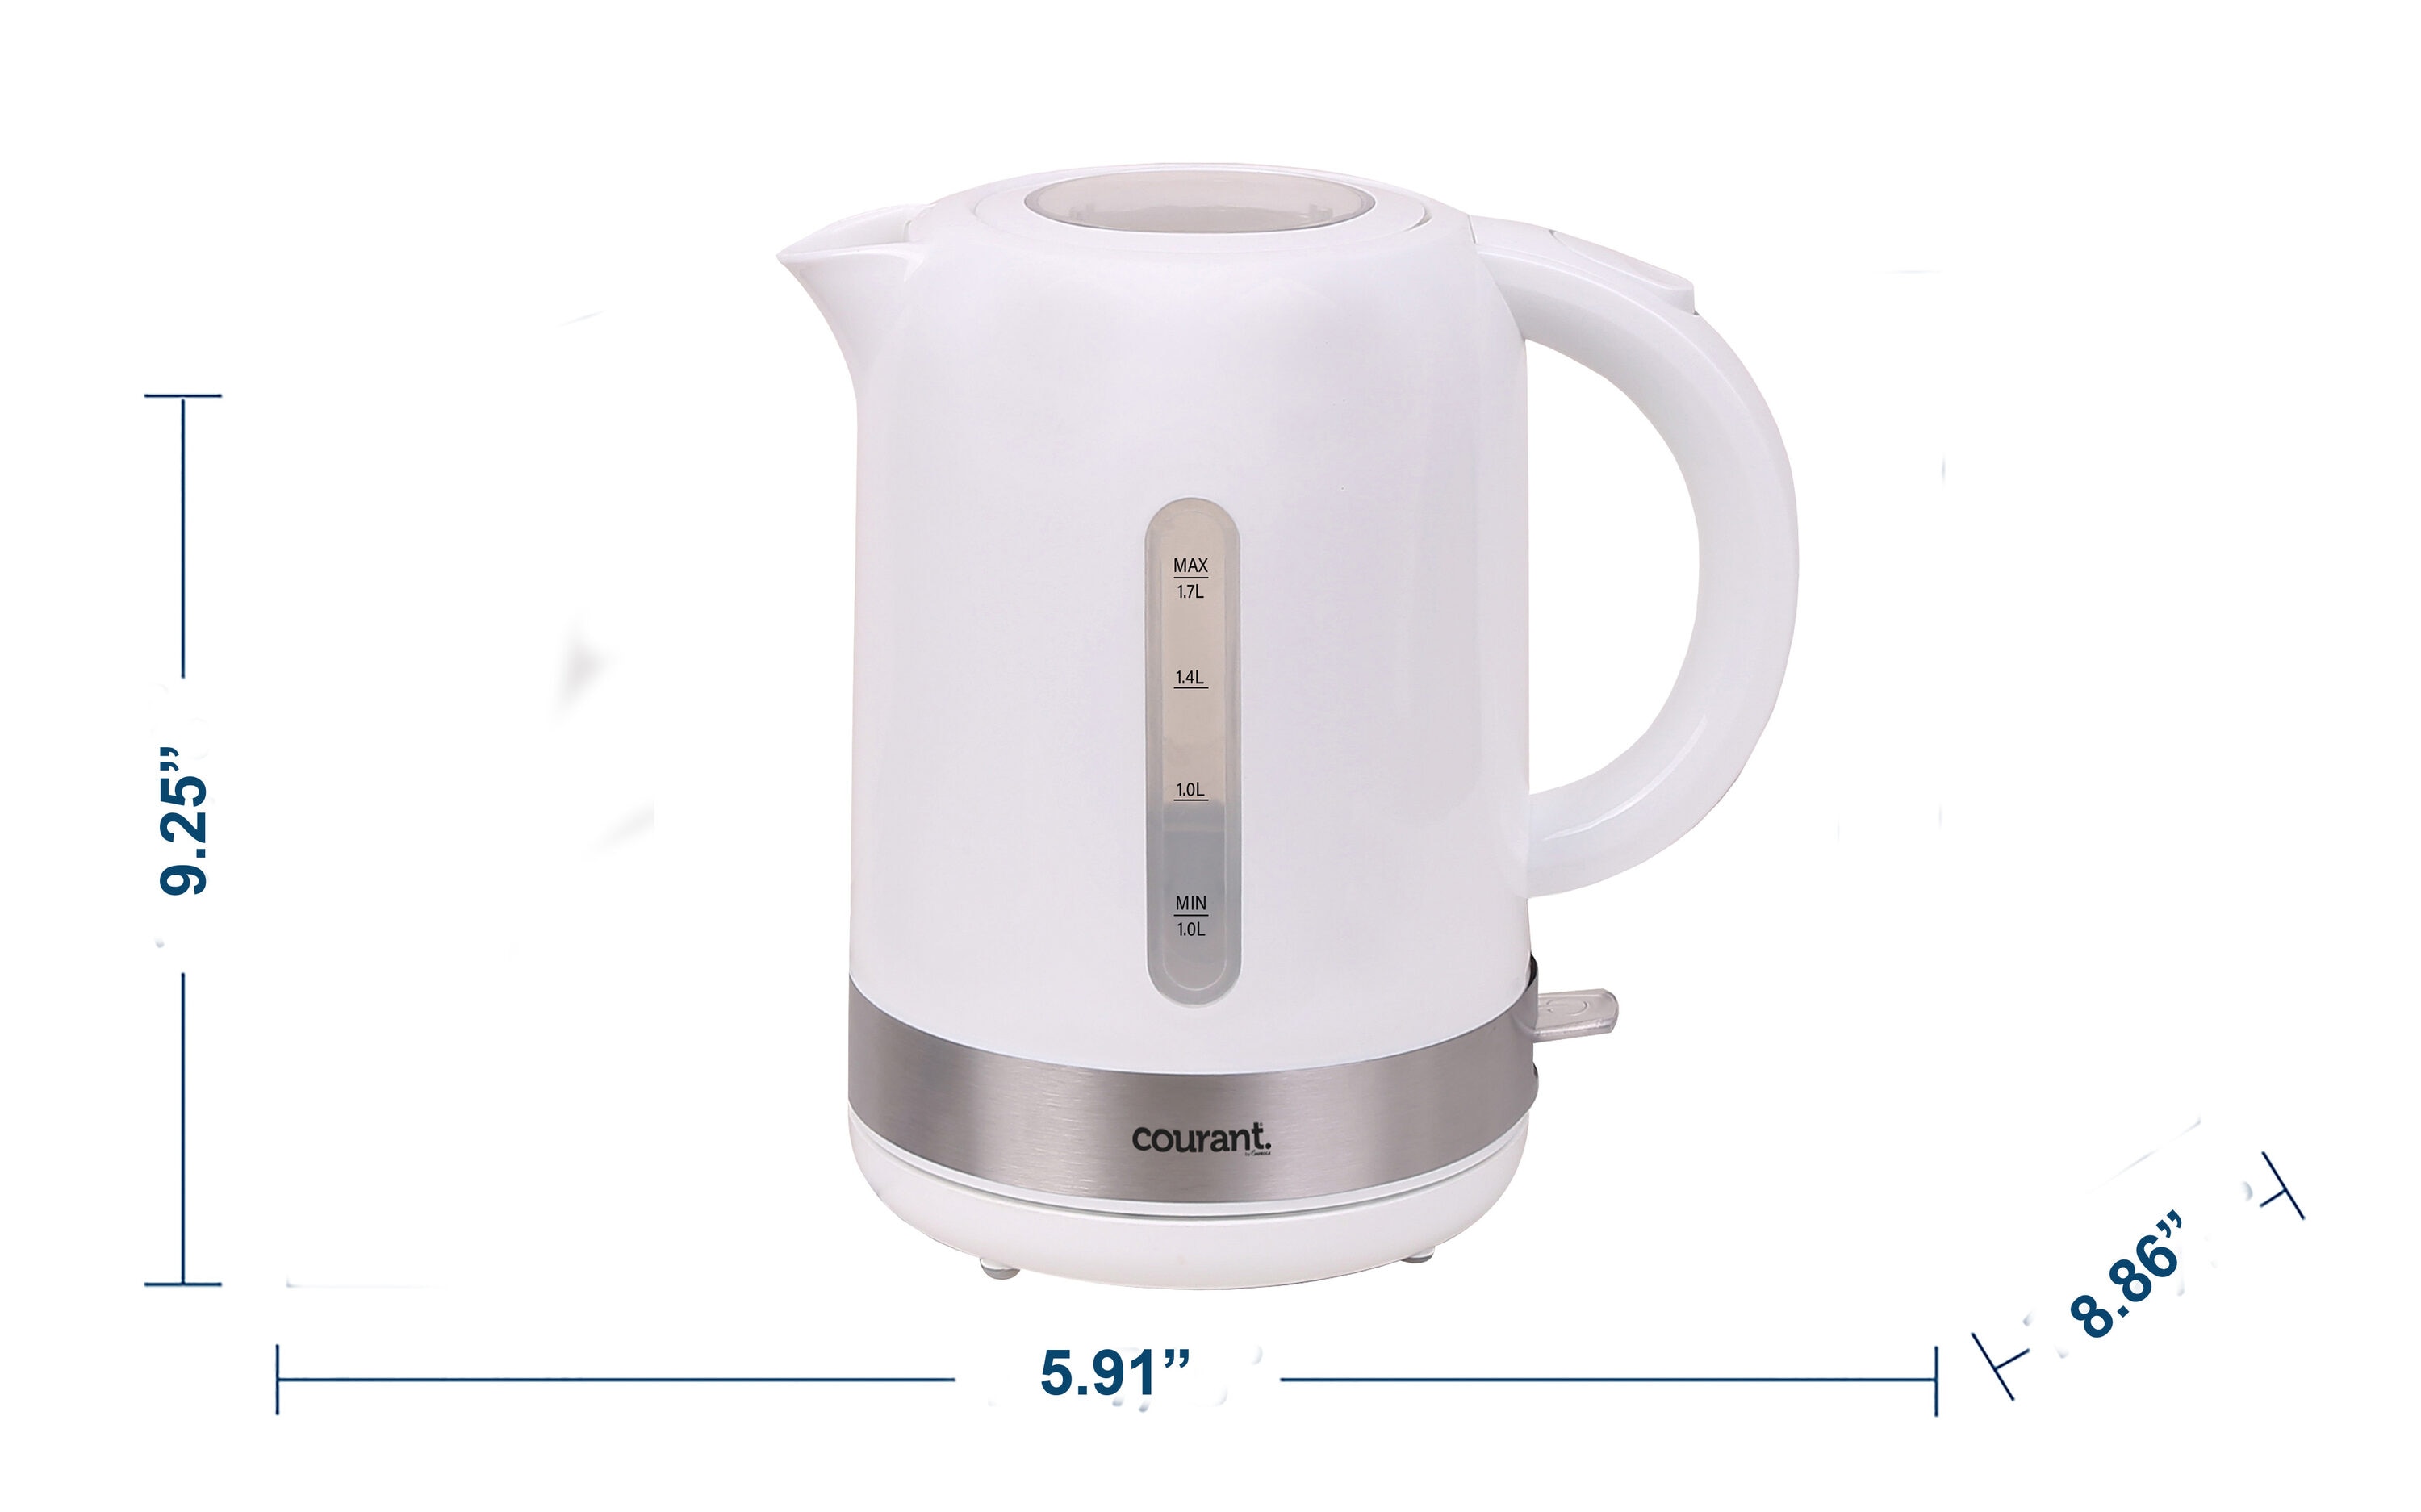 BLACK+DECKER™ 1.7L Rapid Boil Electric Kettle, Boils up to 7 Cups of Water,  Gray